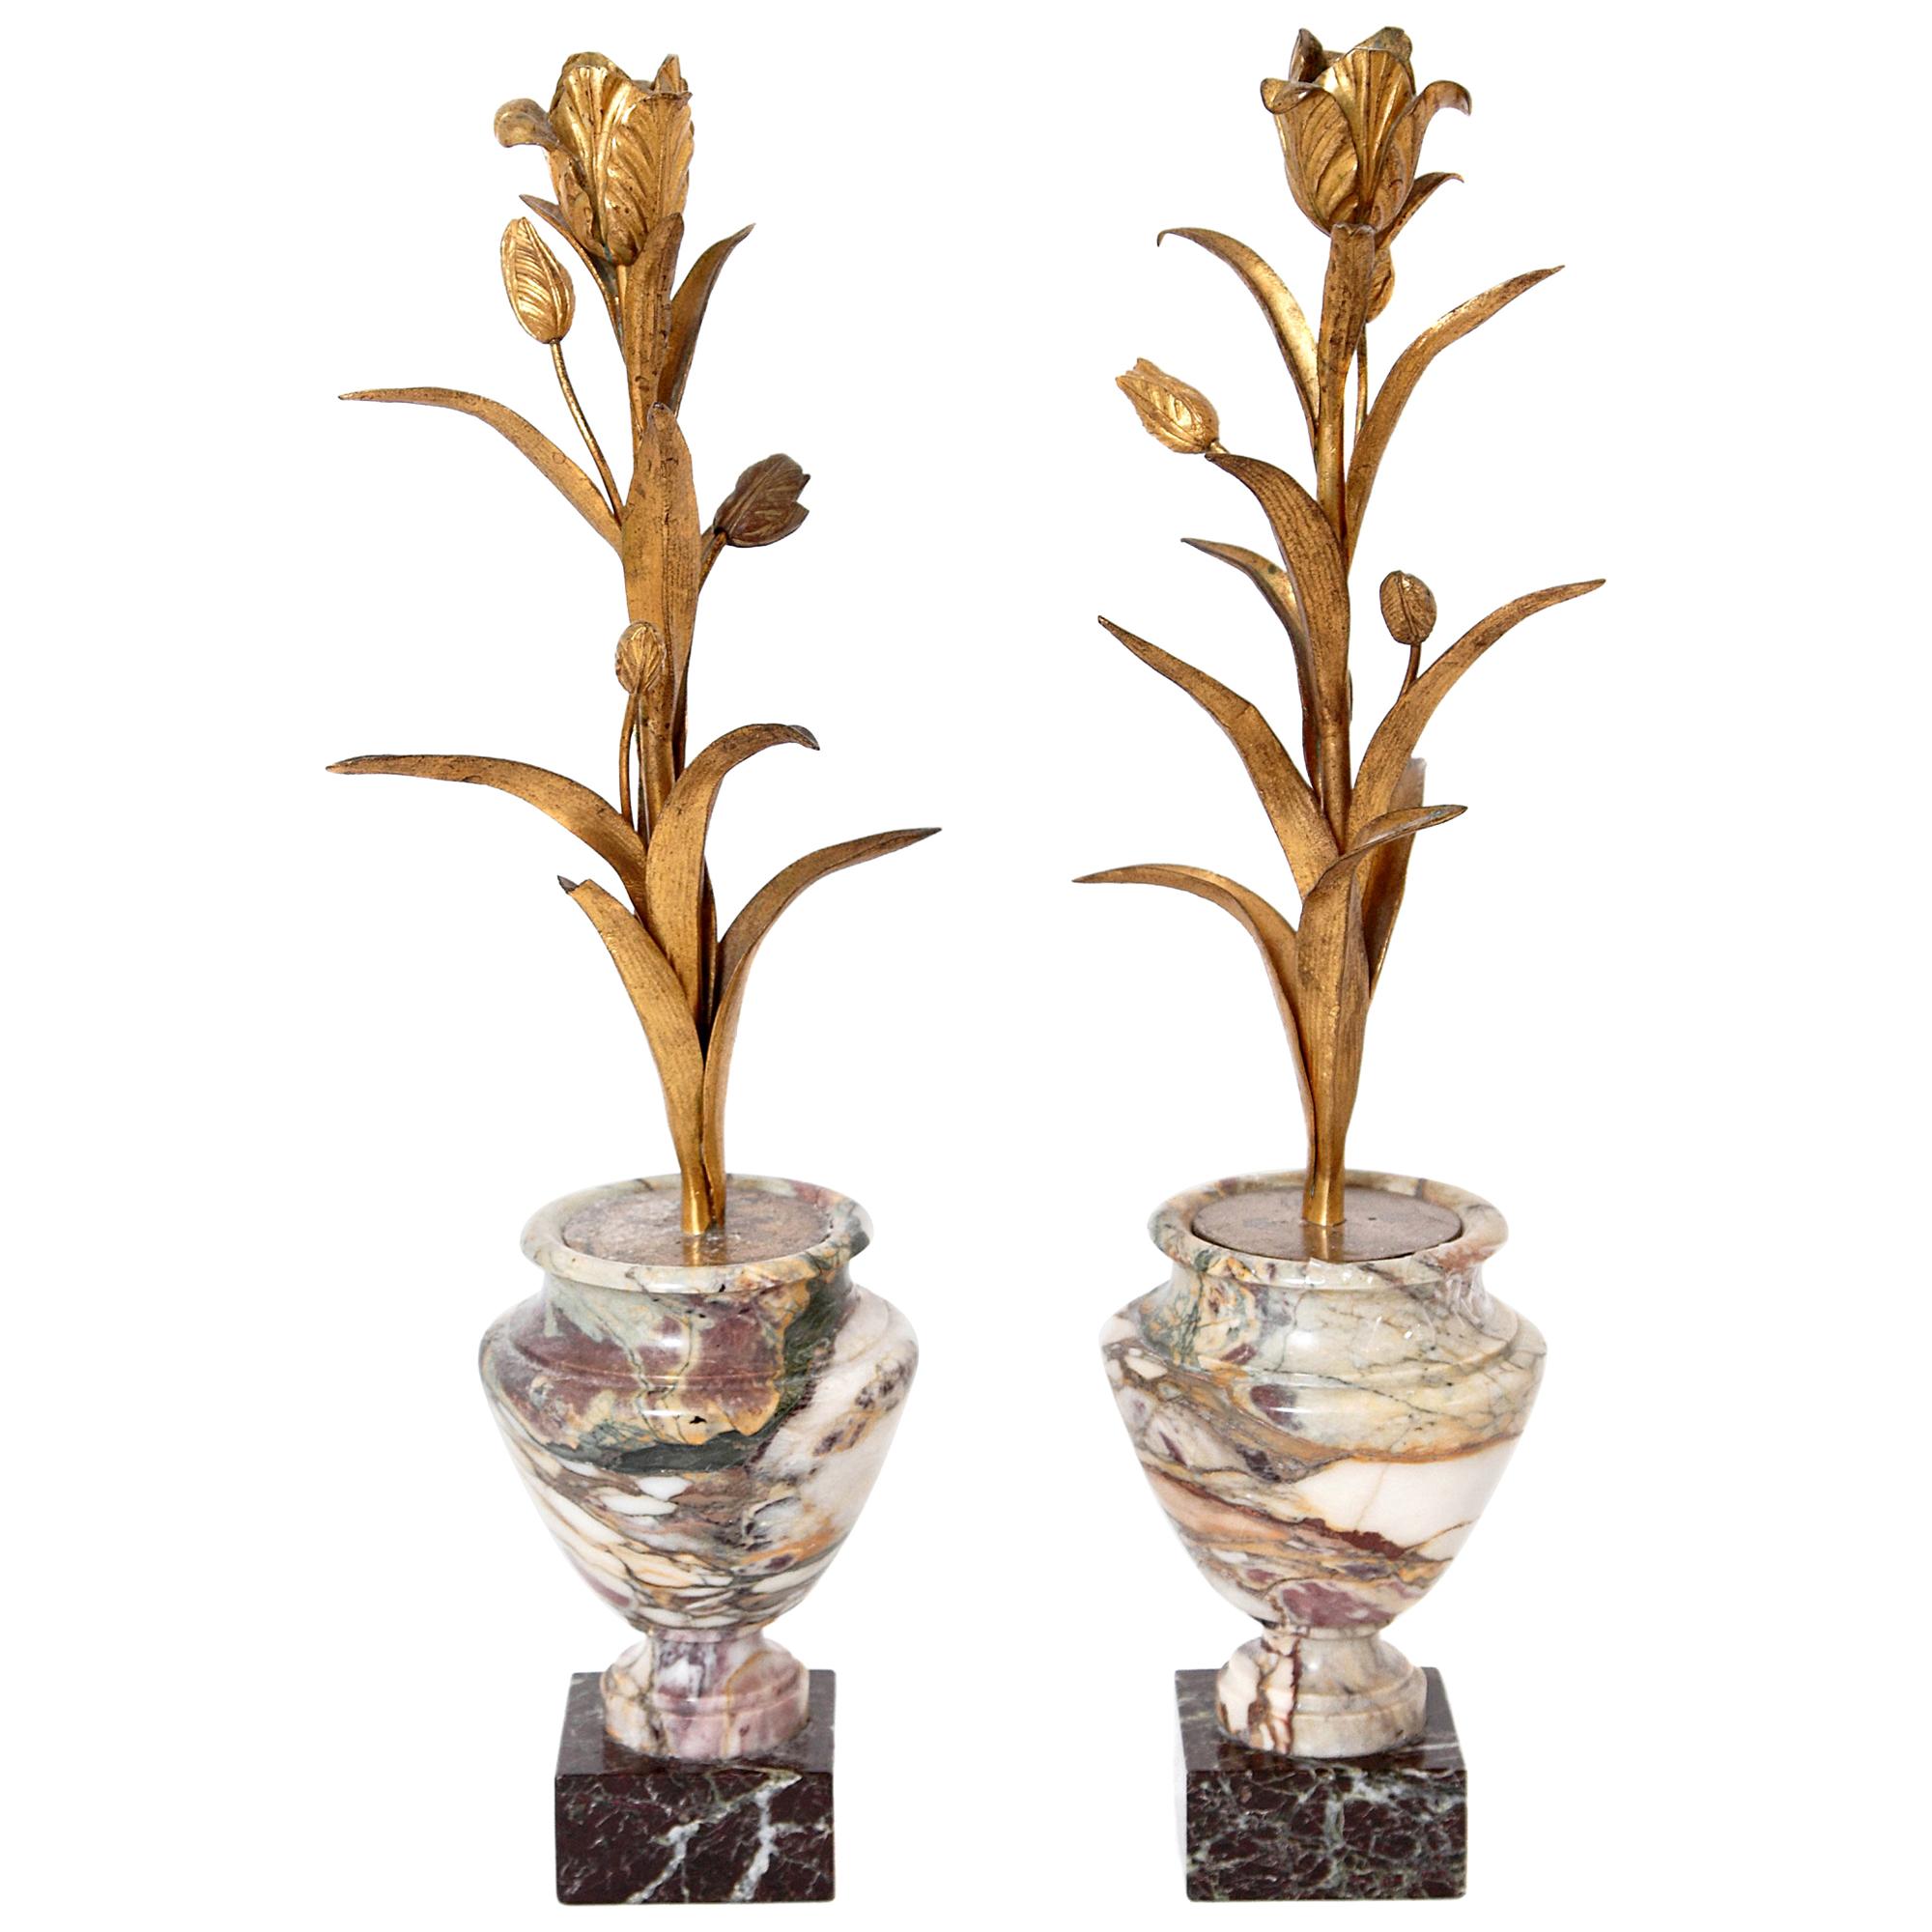 Pair of Gilt Bronze and Marble Tulip Form Candleholders